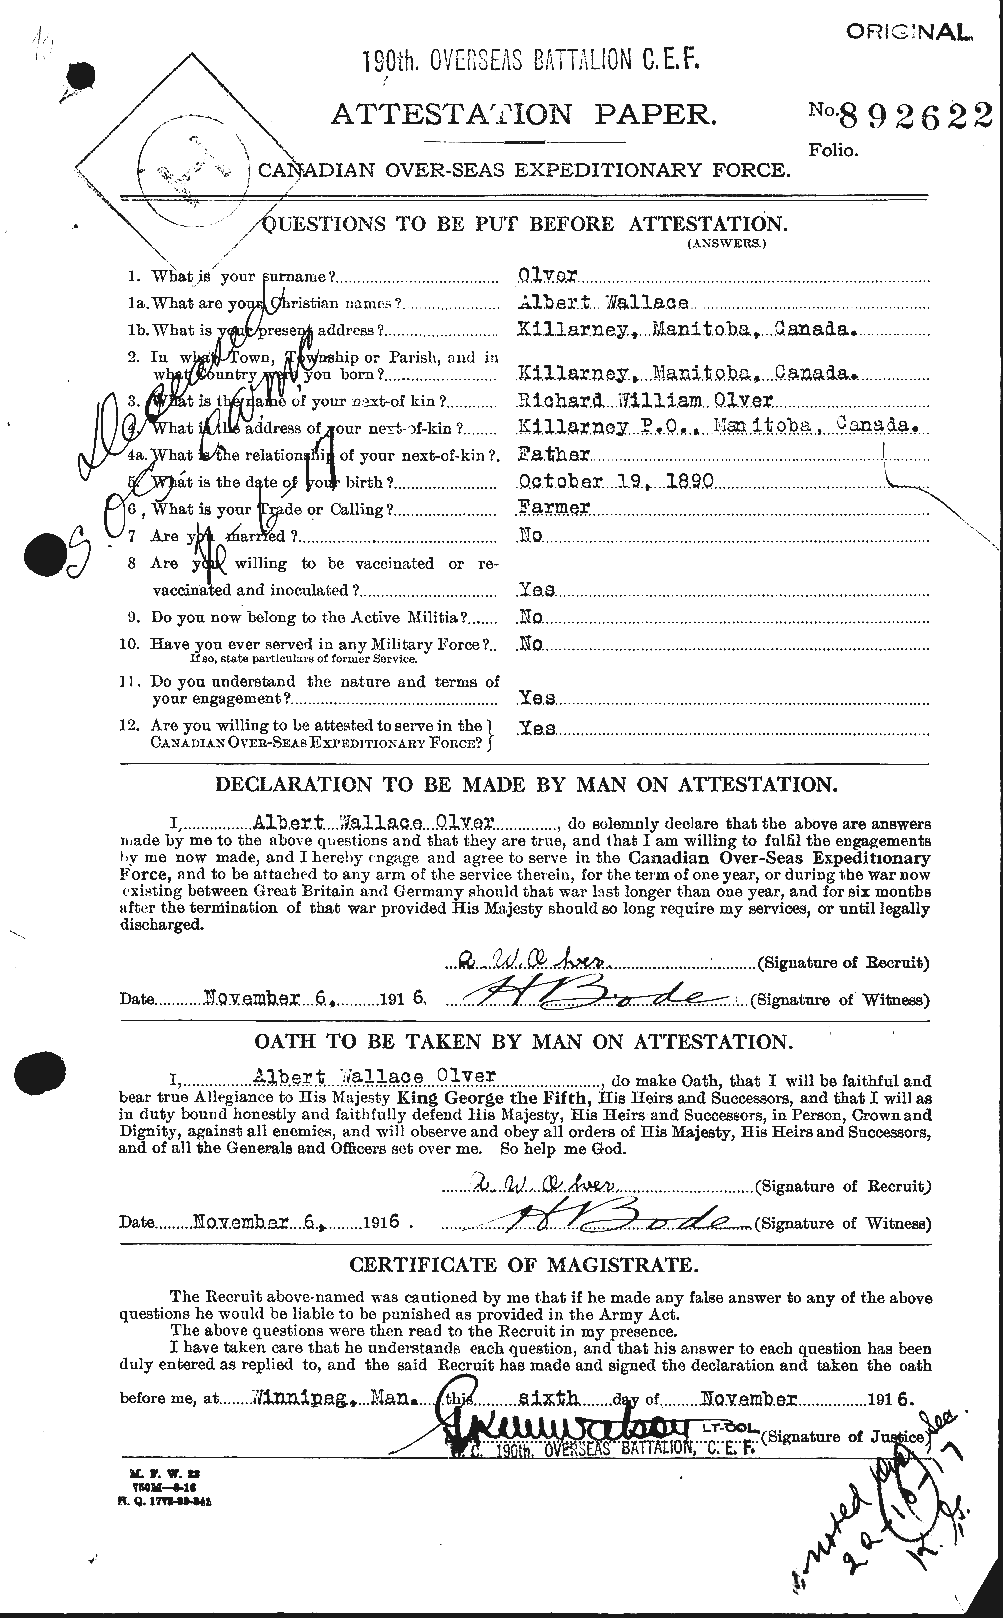 Personnel Records of the First World War - CEF 689947a